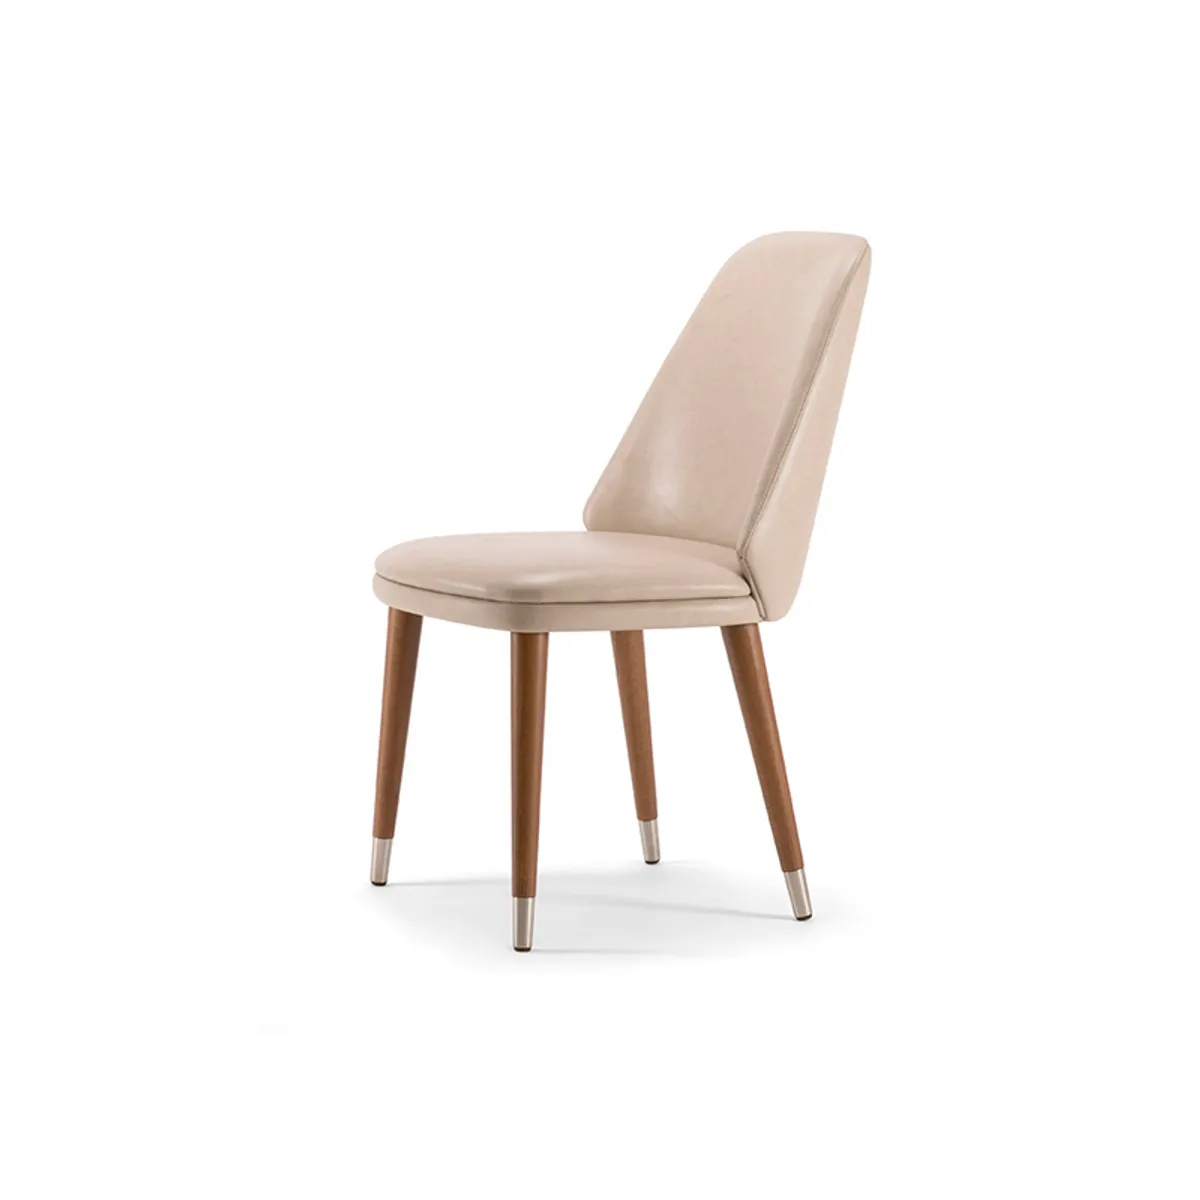 Barton Side Chair Upholstered Chair With Wooden Legs And Metal Slipper Cups Insideoutcontracts074 3